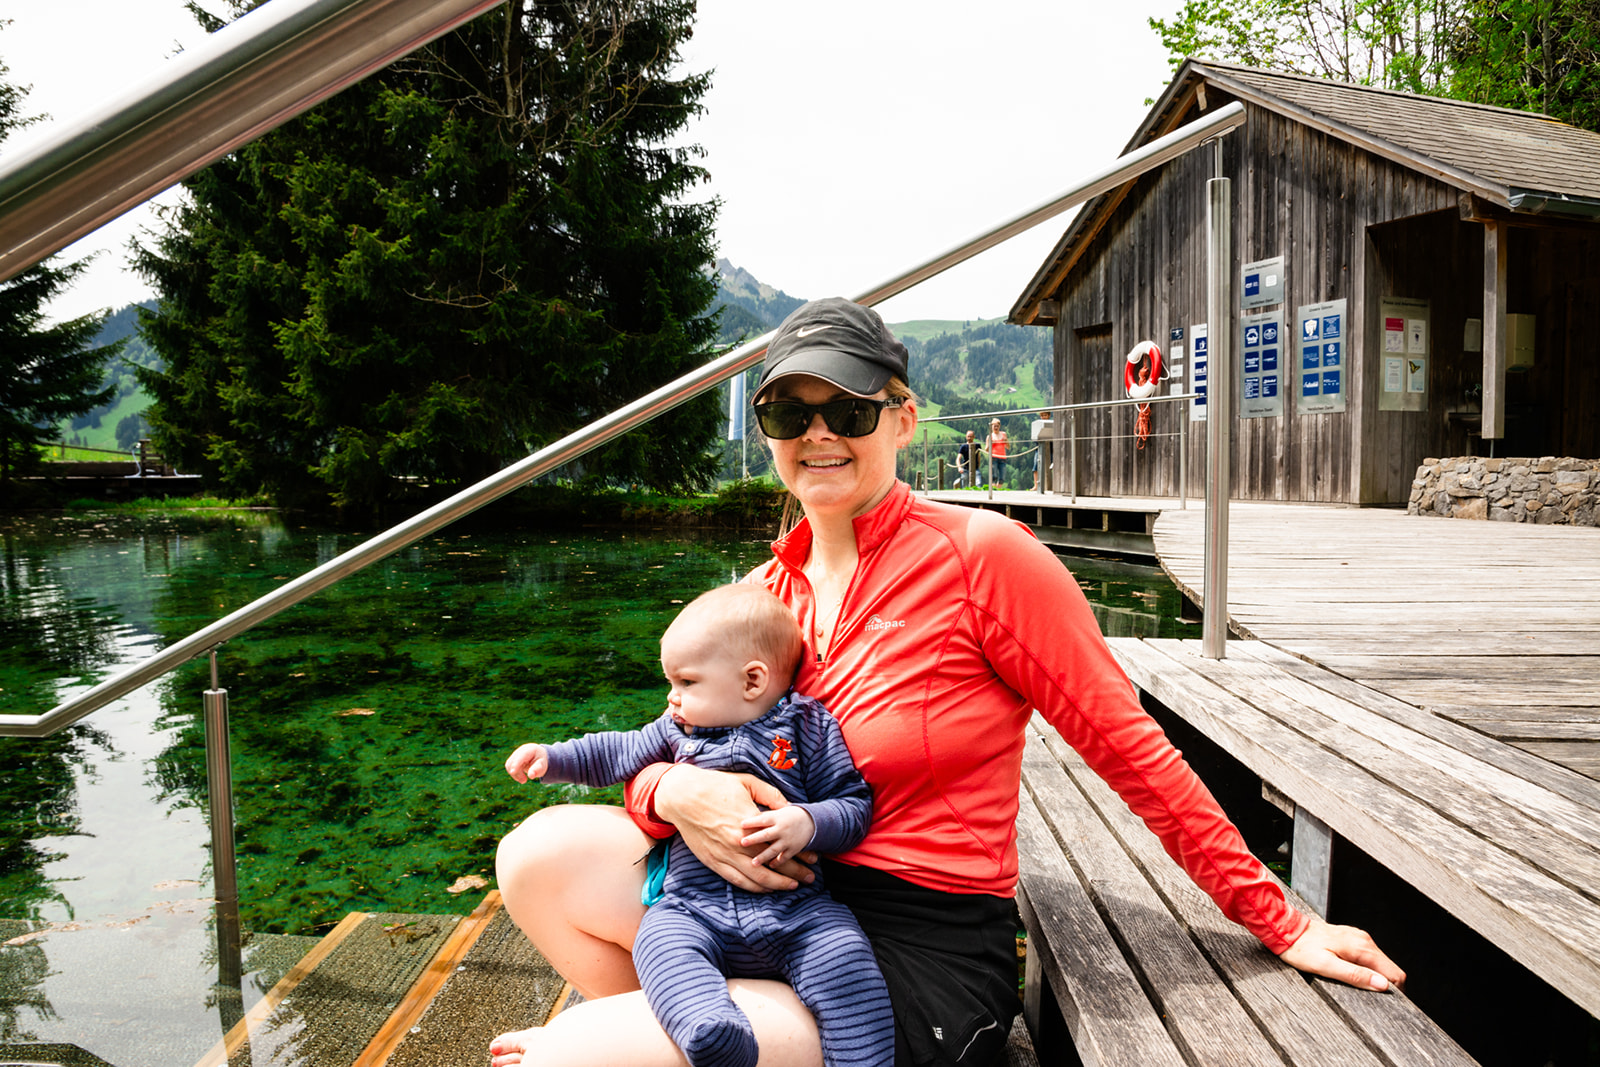 Expat Women and Child in Swiss Alps